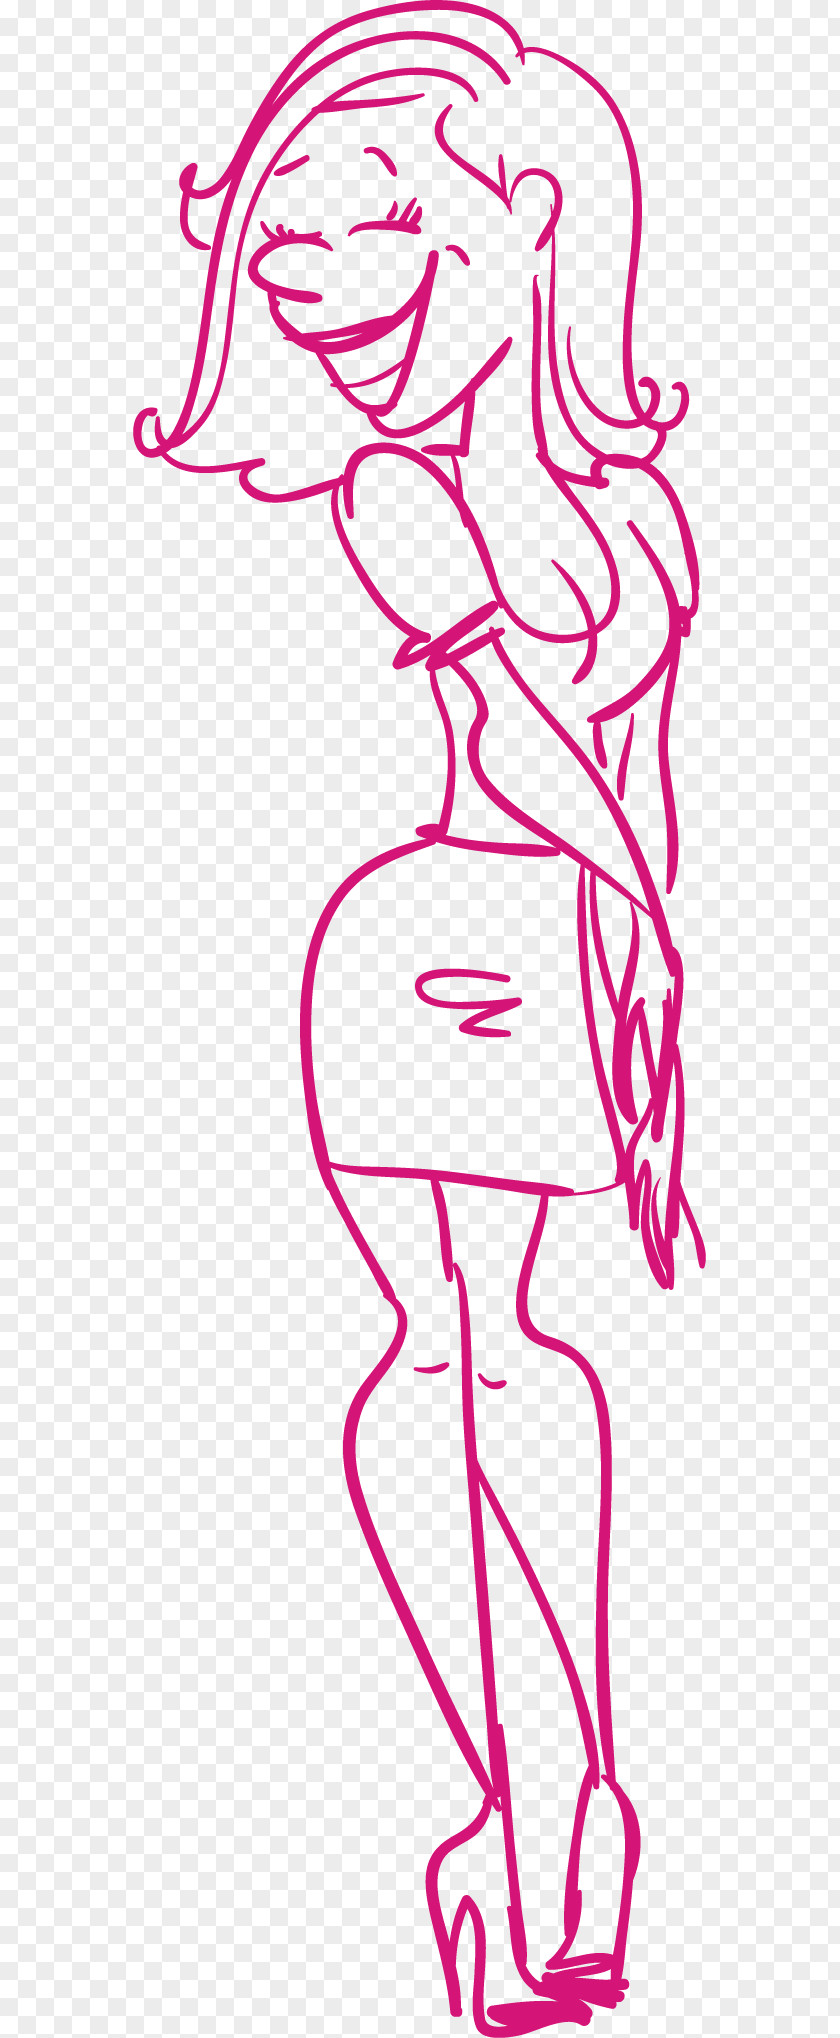 Cute Woman Hip Illustration PNG